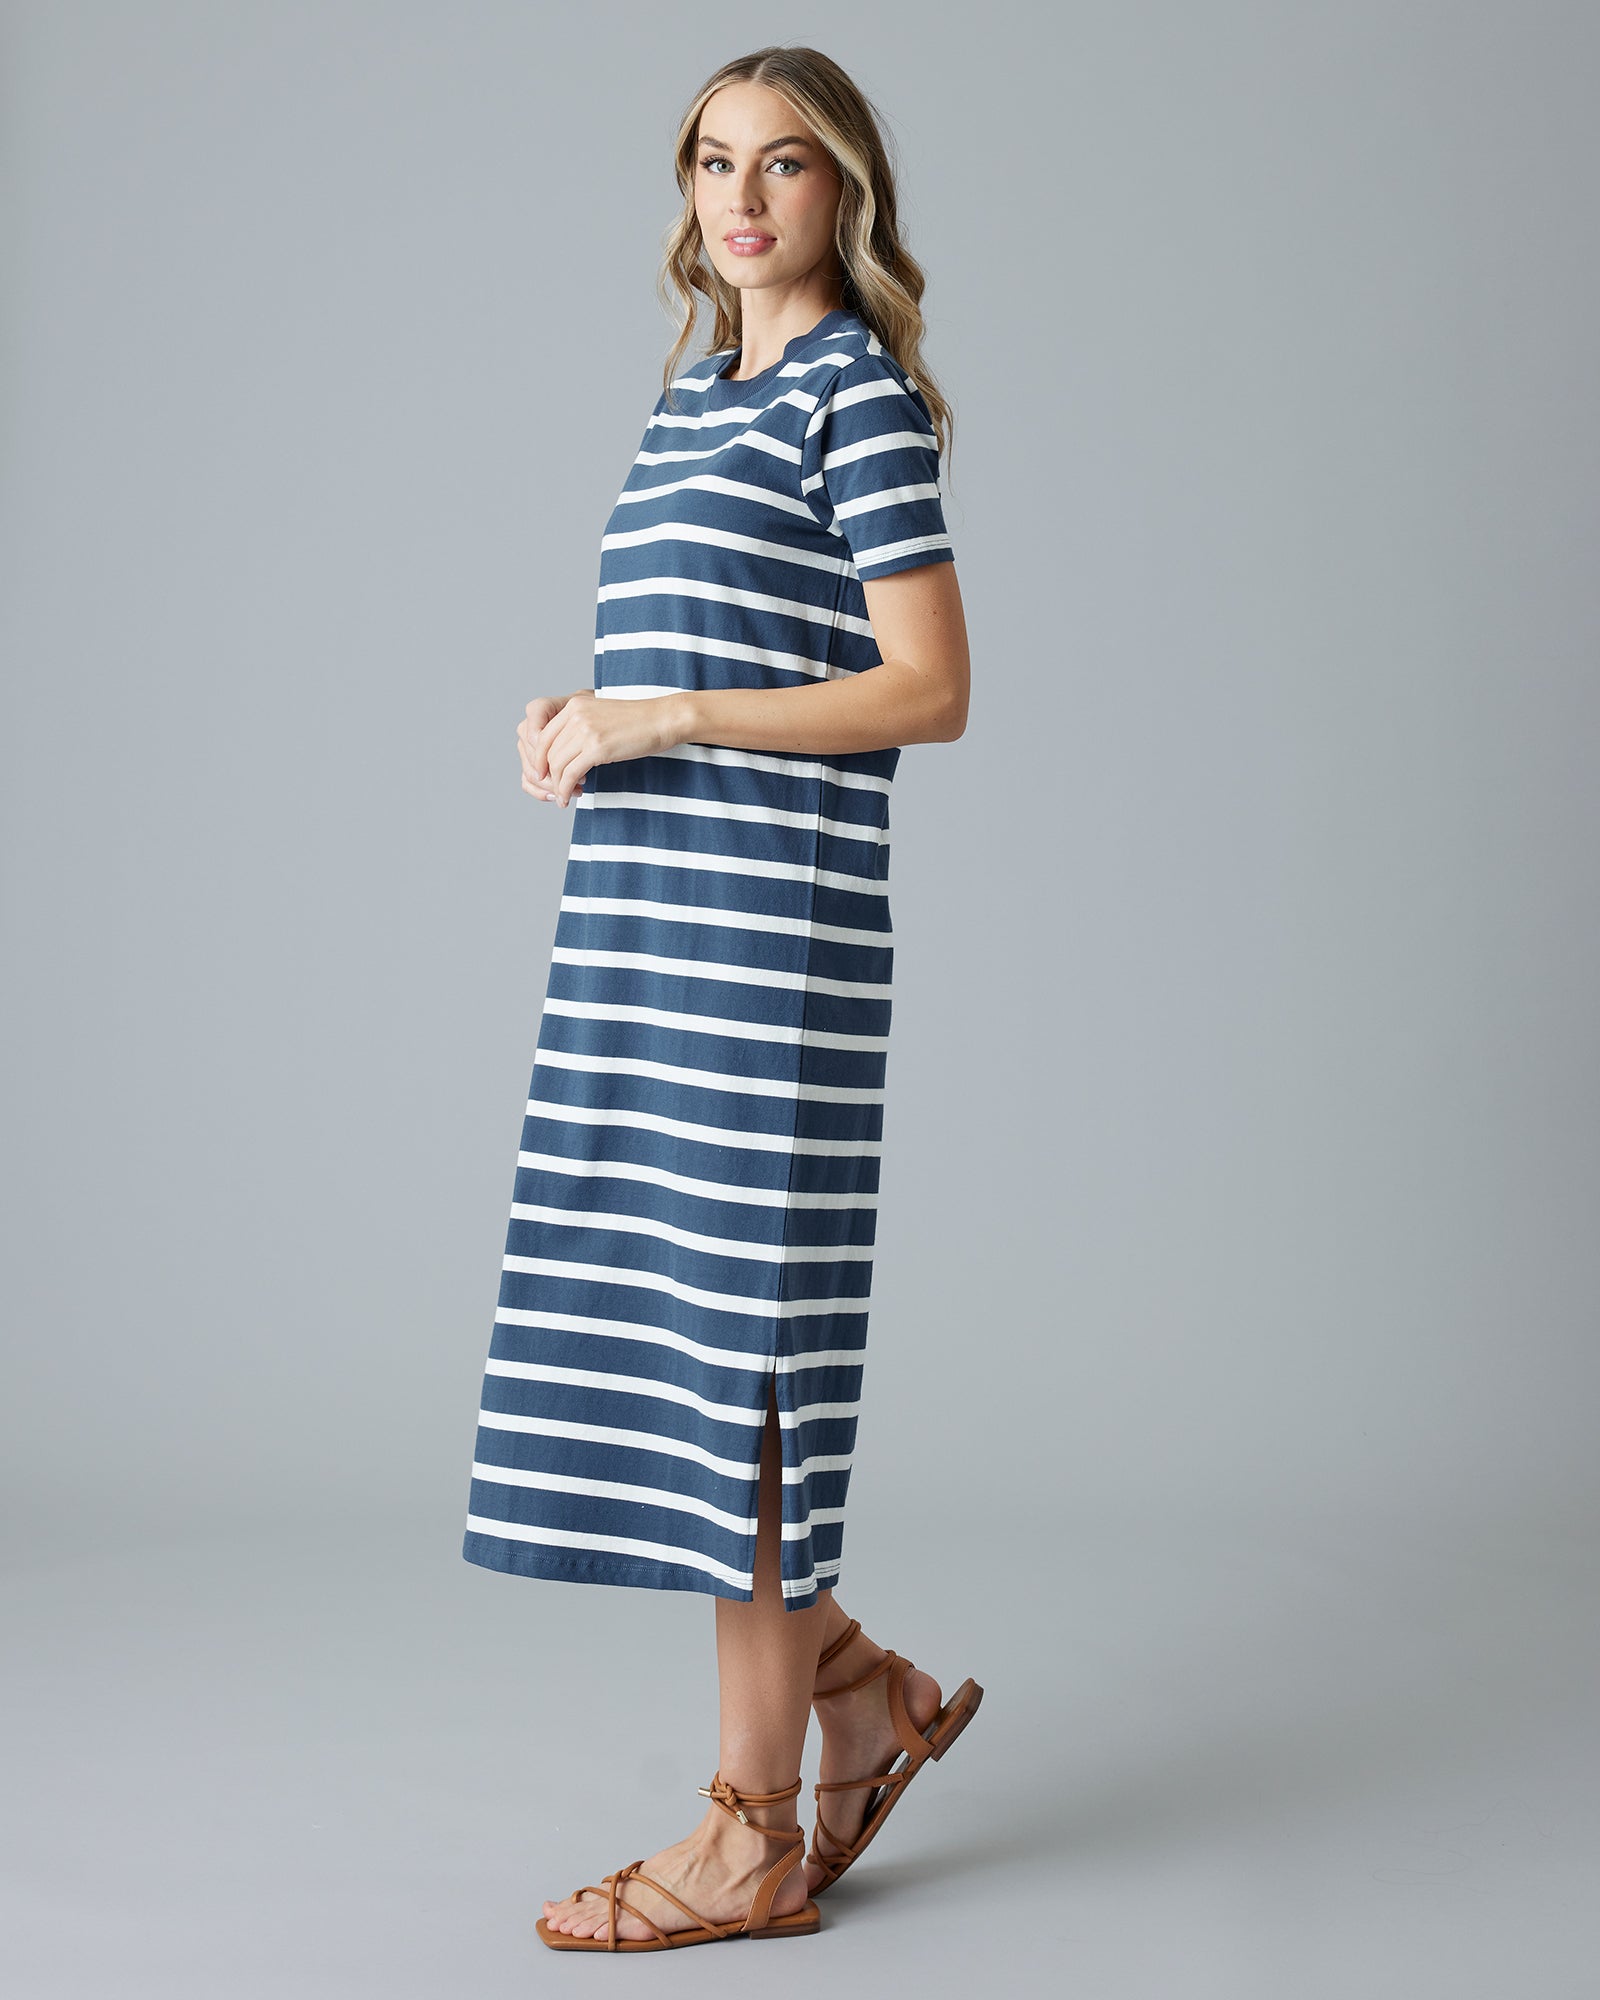 Woman in a navy and white striped short sleeve sheath dress